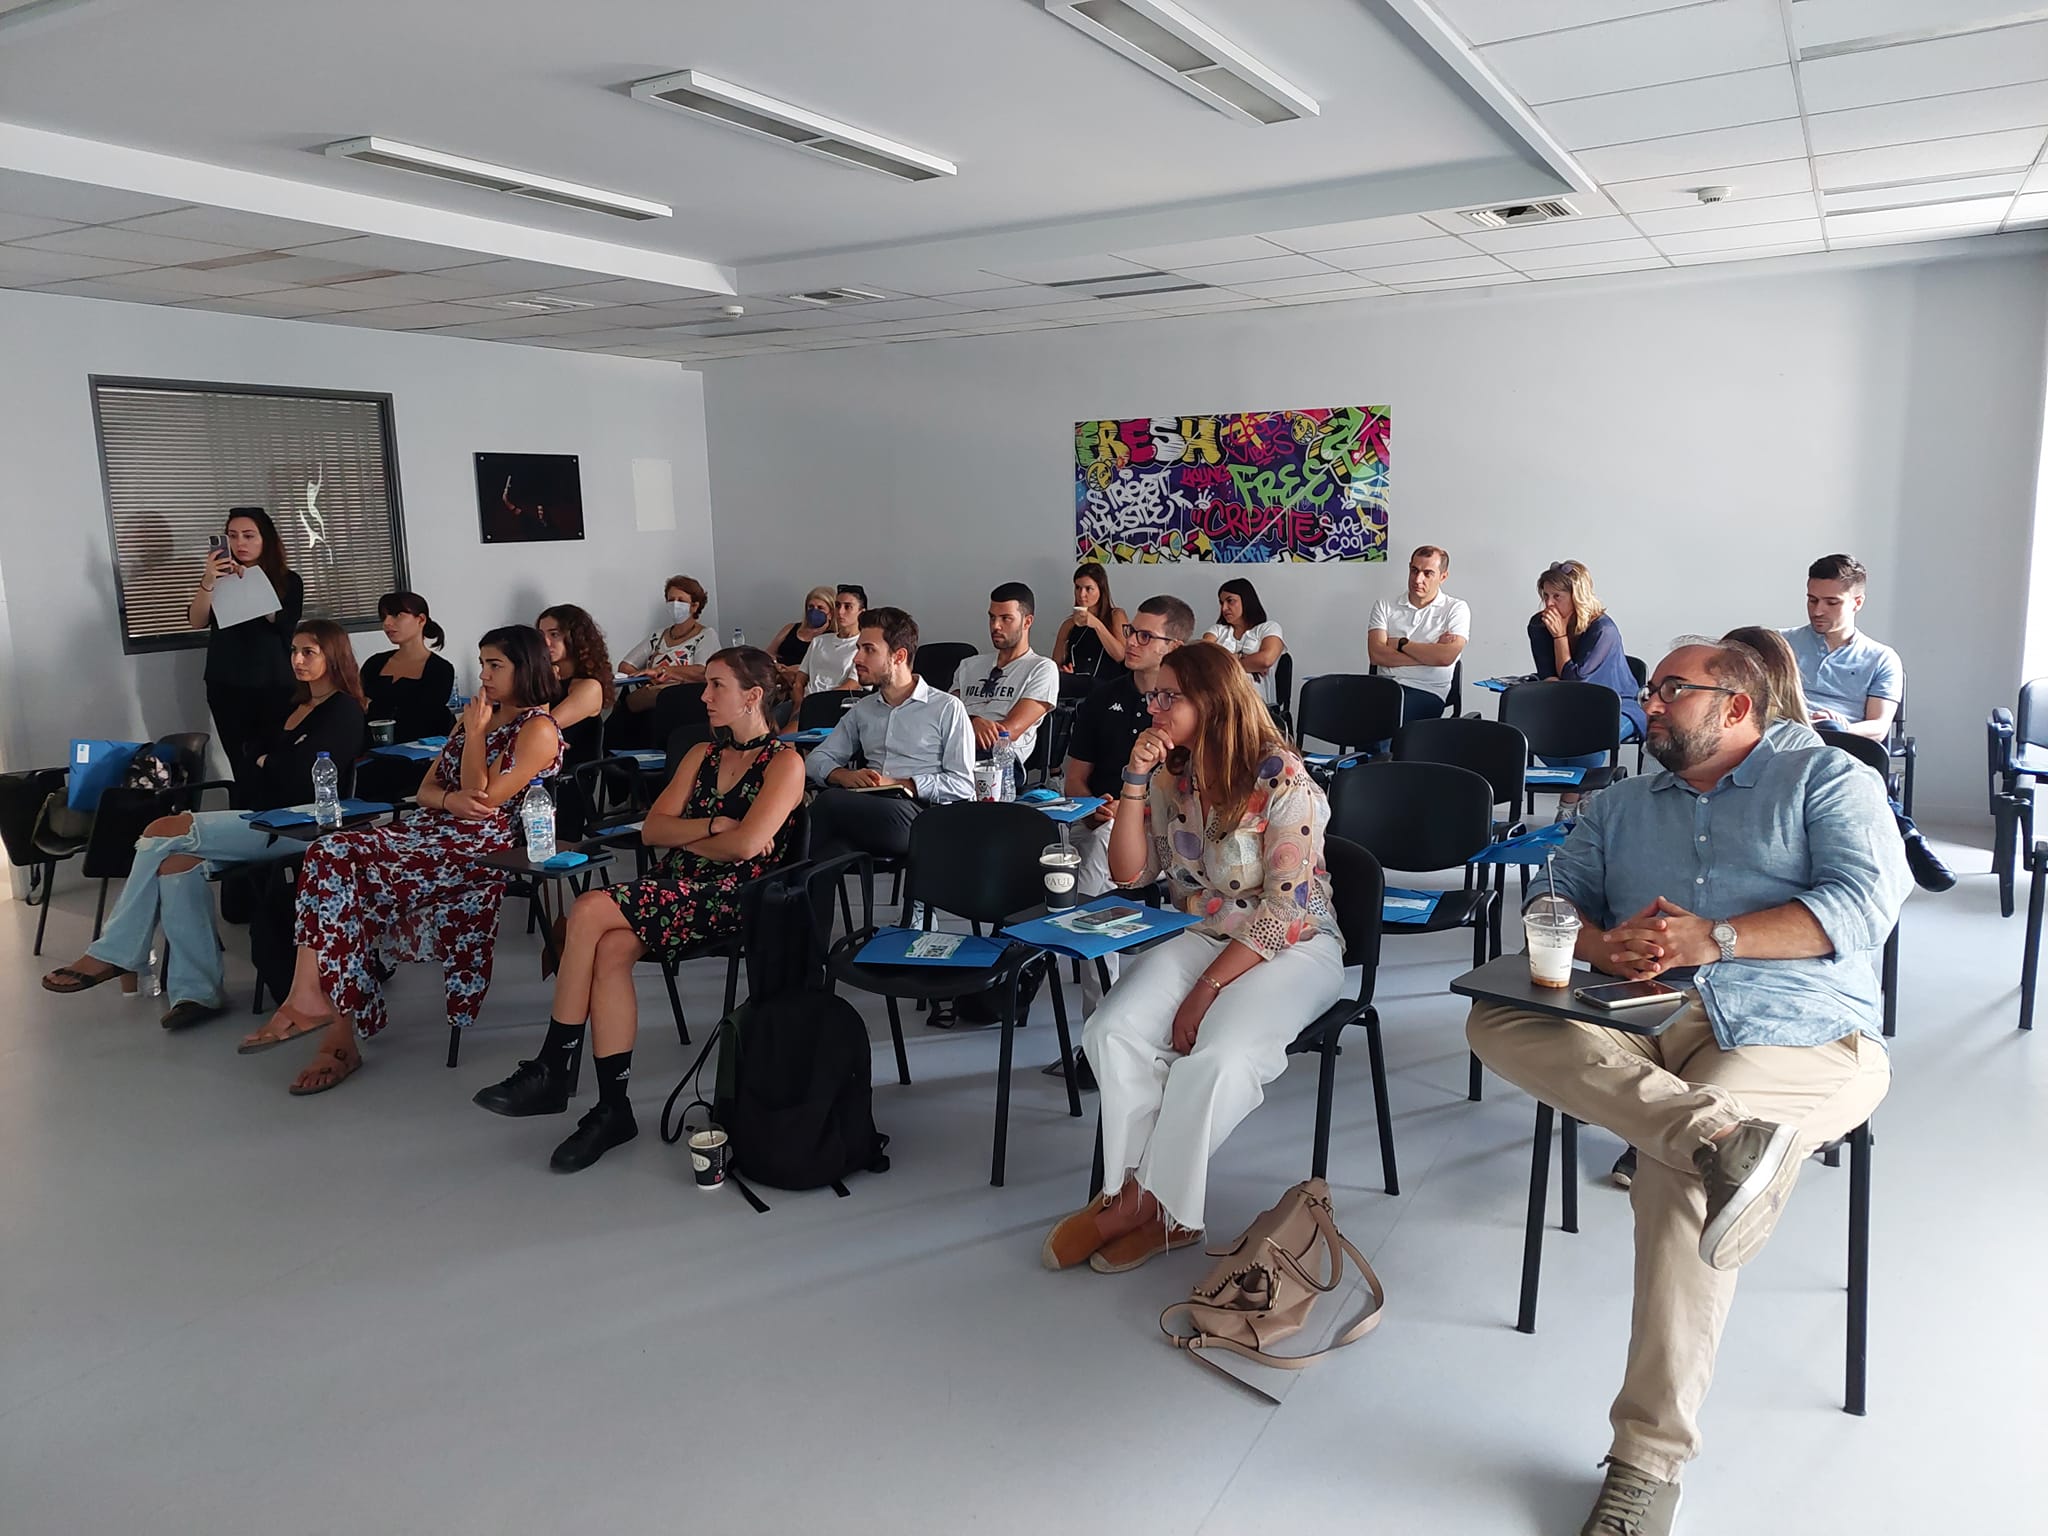 [:en]INFORMATION DAY IN THE CONTEXT OF THE PROJECT ”SUSTDIET-INTEGRATING SUSTAINABILITY IN ATHLETES’ DIETARY CHOICES”[:el]ΗΜΕΡΙΔΑ ΕΝΗΜΕΡΩΣΗΣ ΣΤΟ ΠΛΑΙΣΙΟ ΤΟΥ ΕΡΓΟΥ ”SUSTDIET-INTEGRATING SUSTAINABILITY IN ATHLETES’ DIETARY CHOICES”[:]